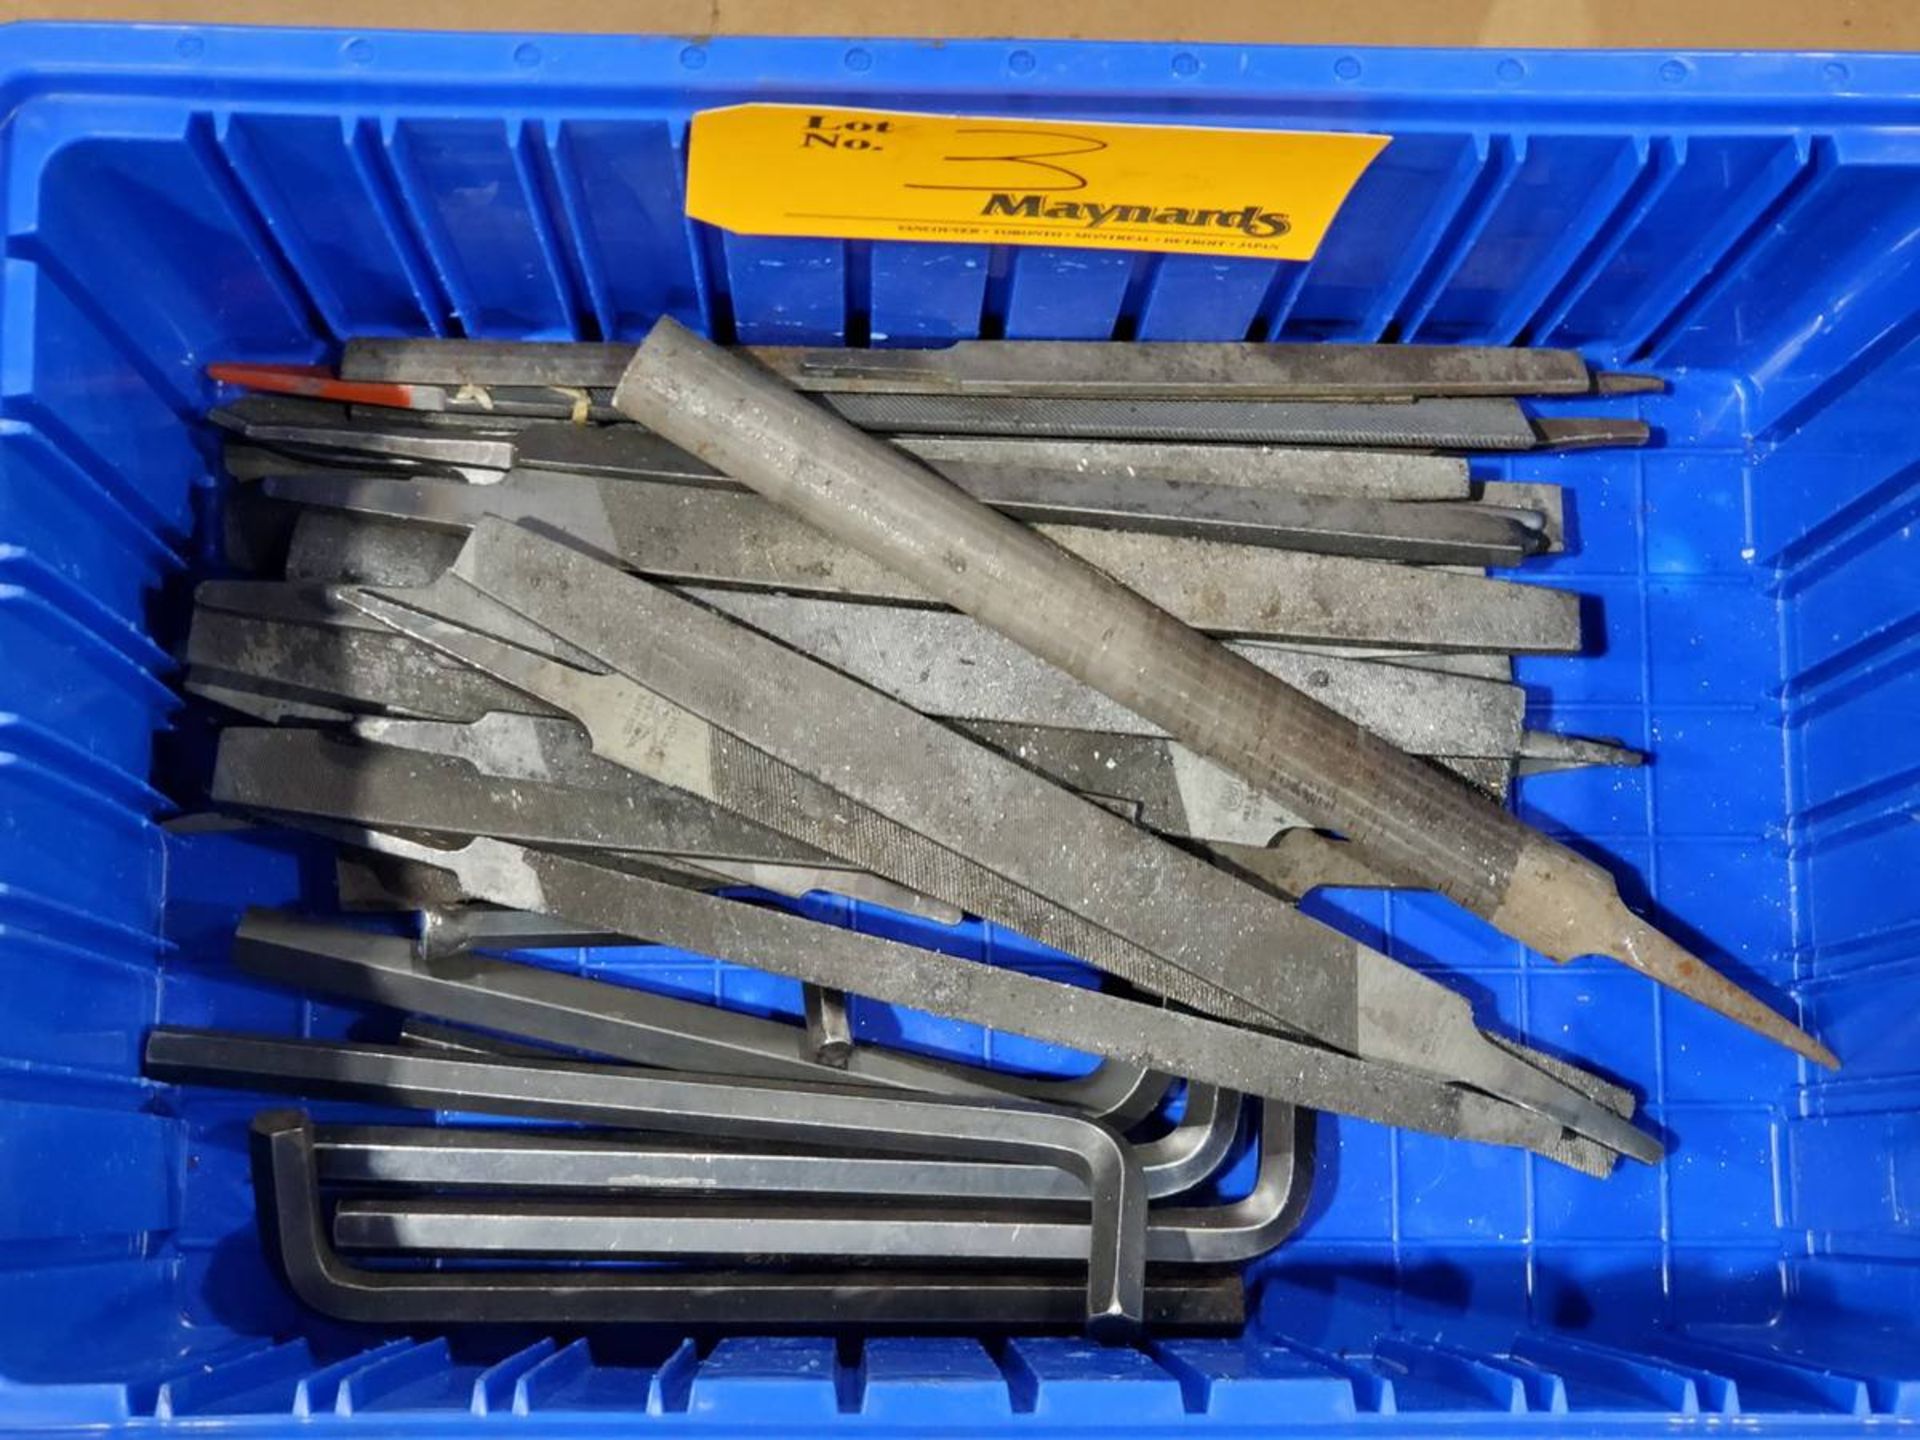 Assorted Files & Allen Wrenches